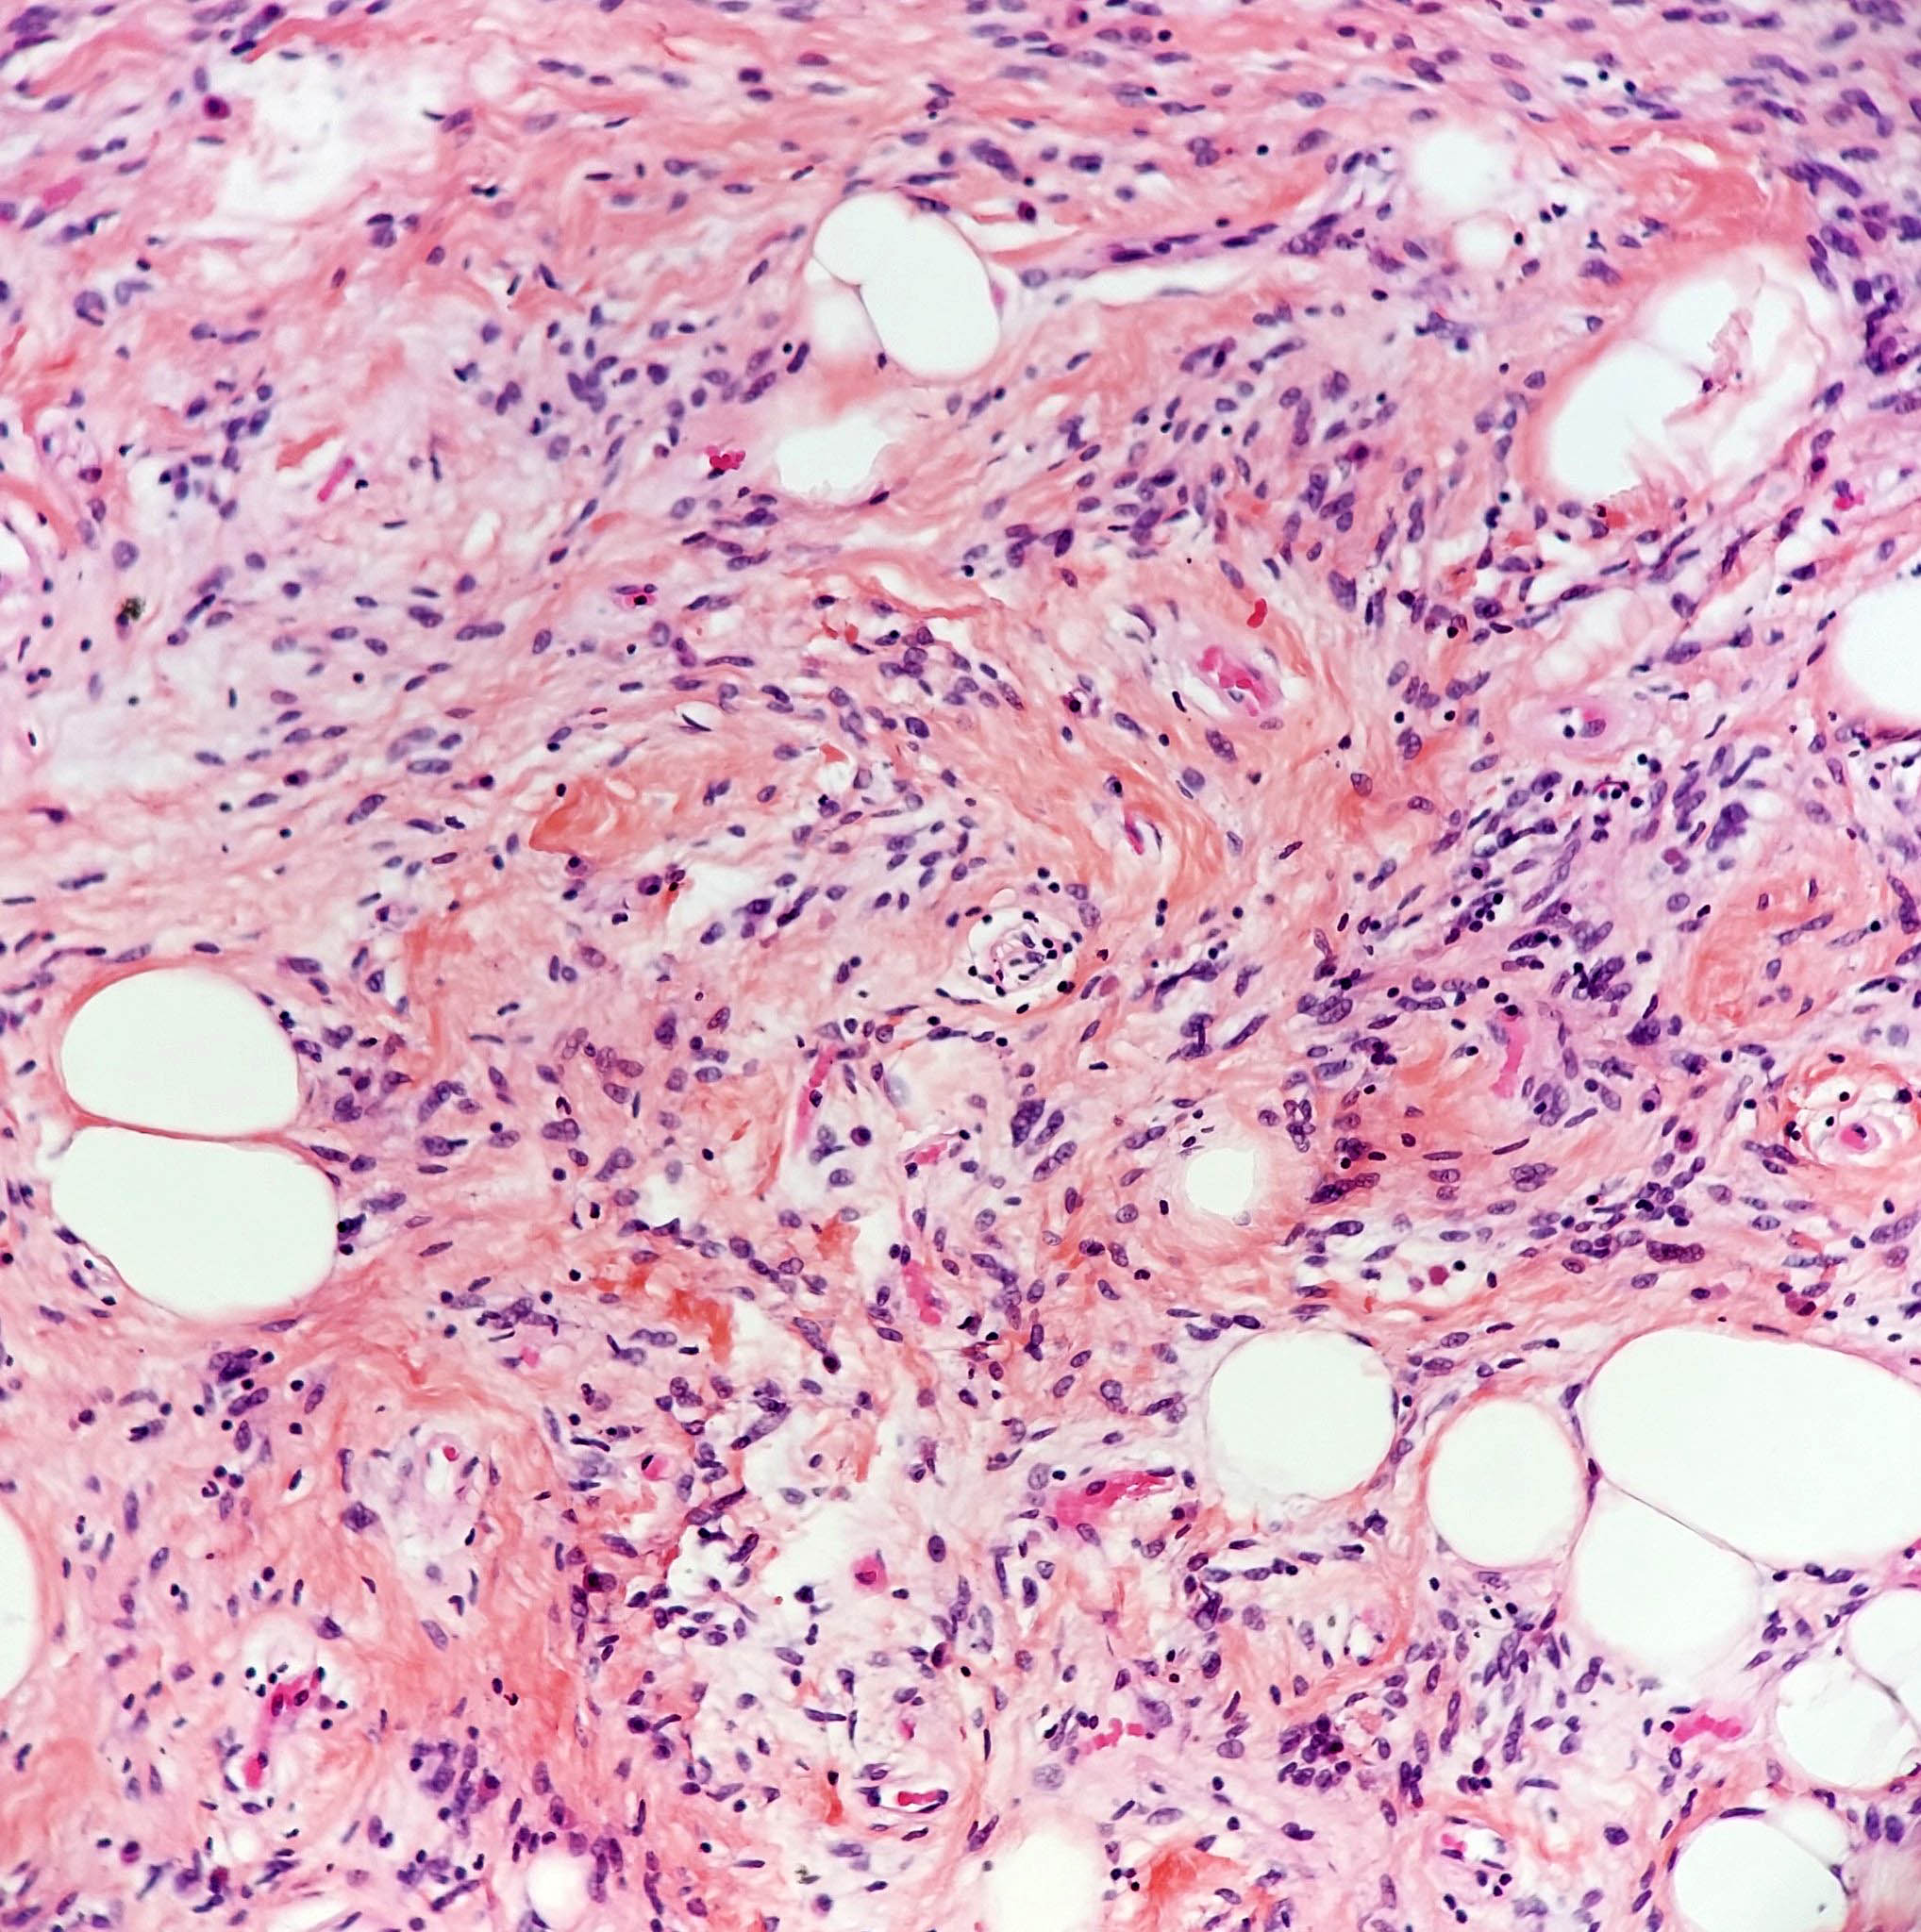 Spindle cell / pleomorphic lipoma